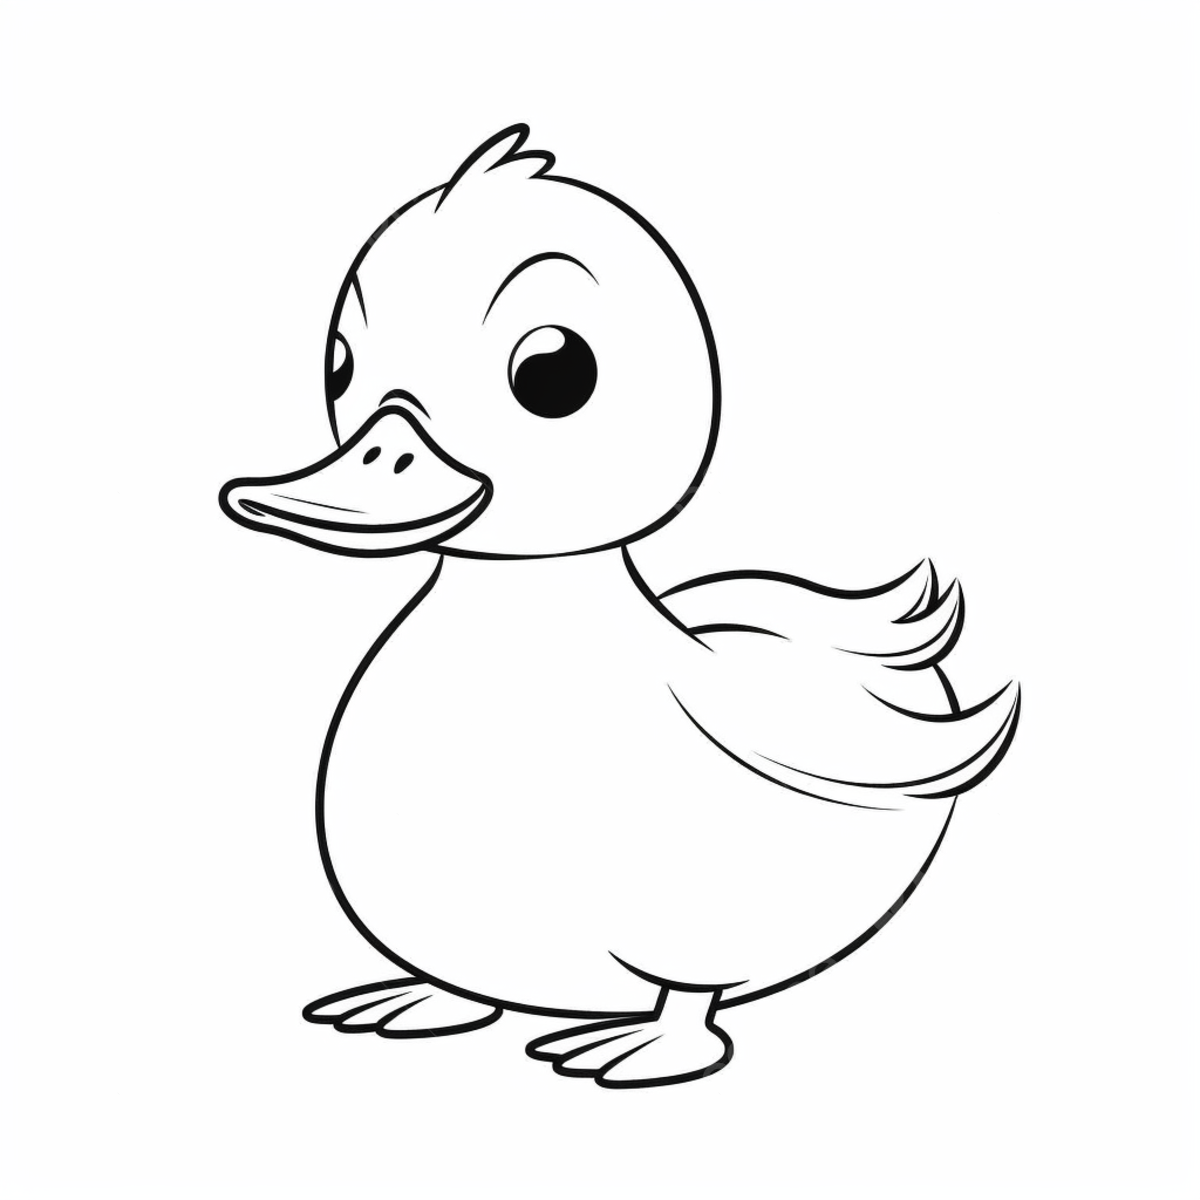 The baby duck illustration of black and white coloring pages duck drawing baby drawing rat drawing png transparent image and clipart for free download